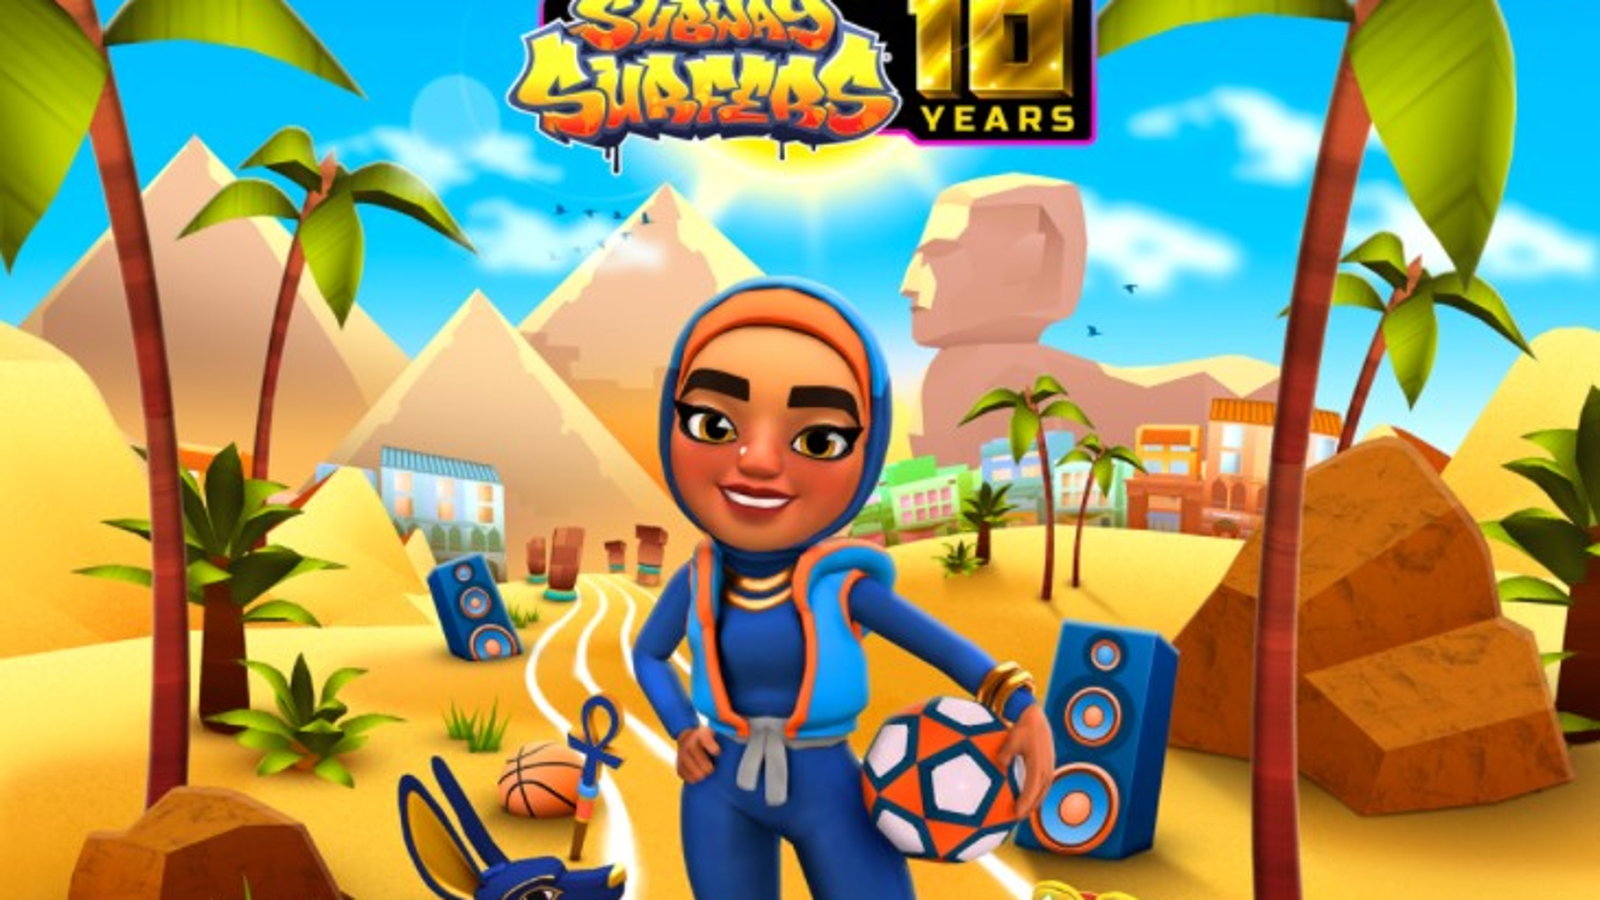 Kiloo Games on X: New update out for Subway Surfers! Surf with